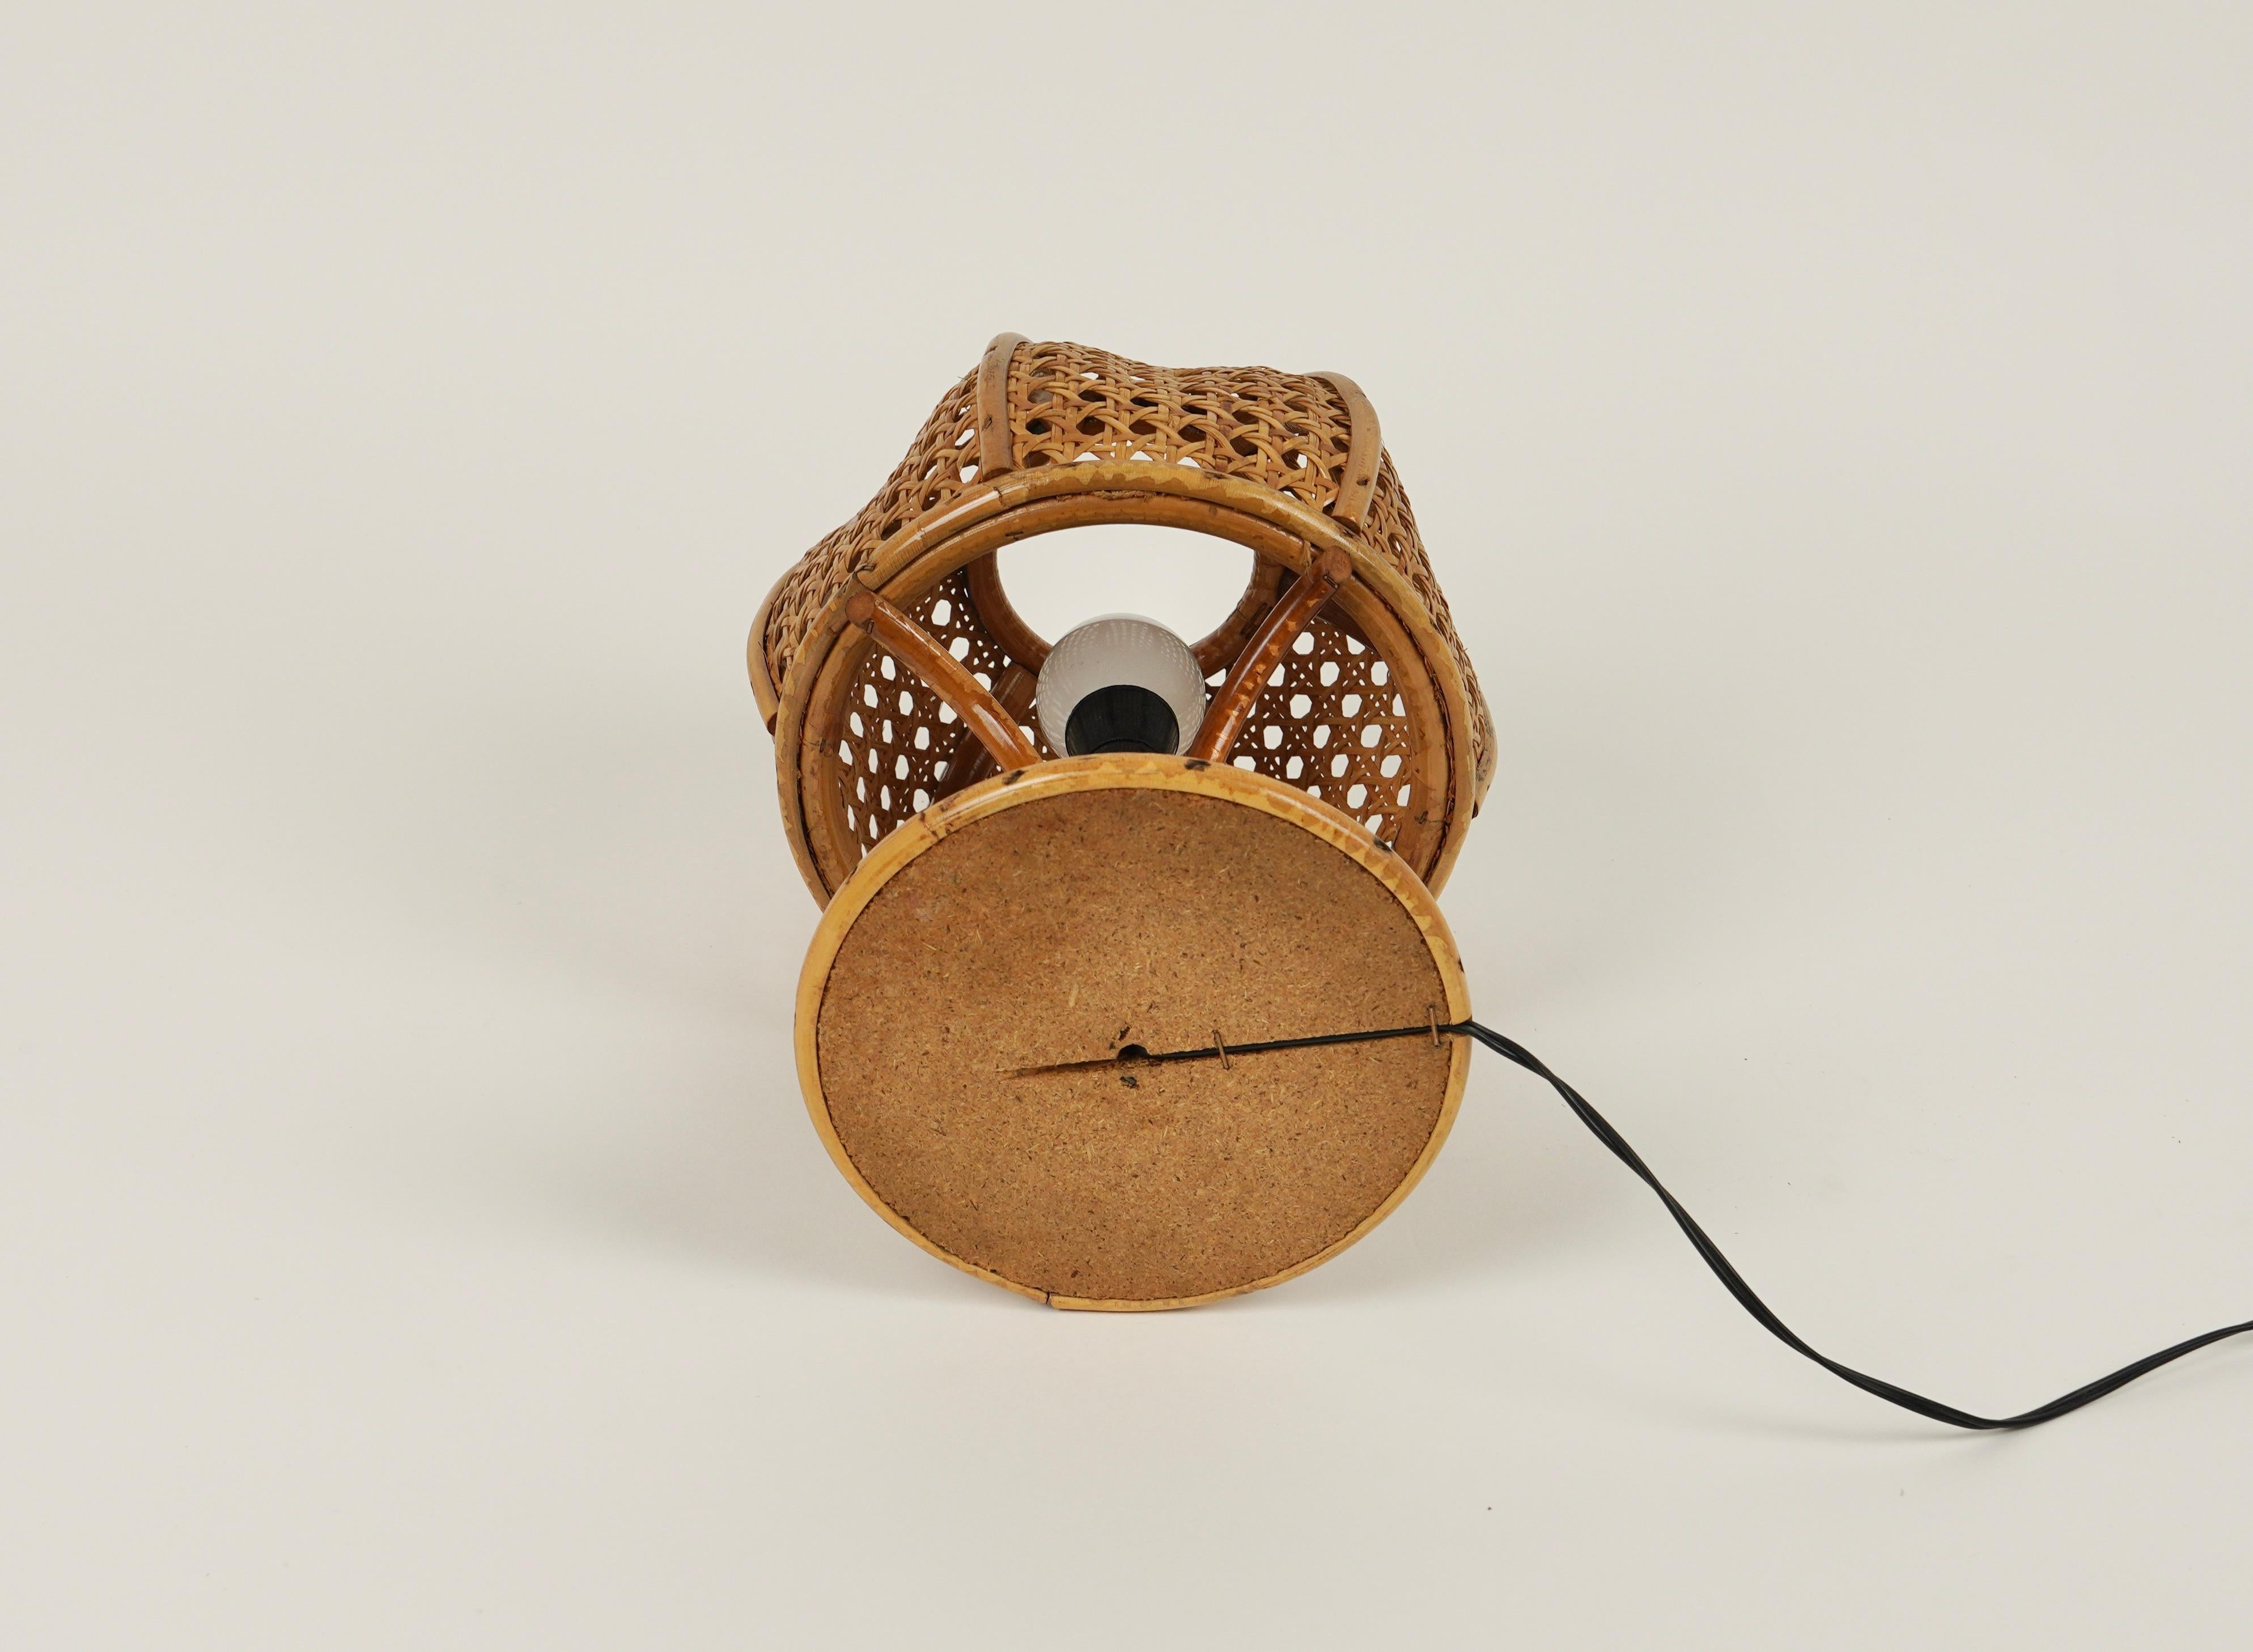 Midcentury Rattan and Wicker Table Lamp Louis Sognot Style, Italy, circa 1970s For Sale 1